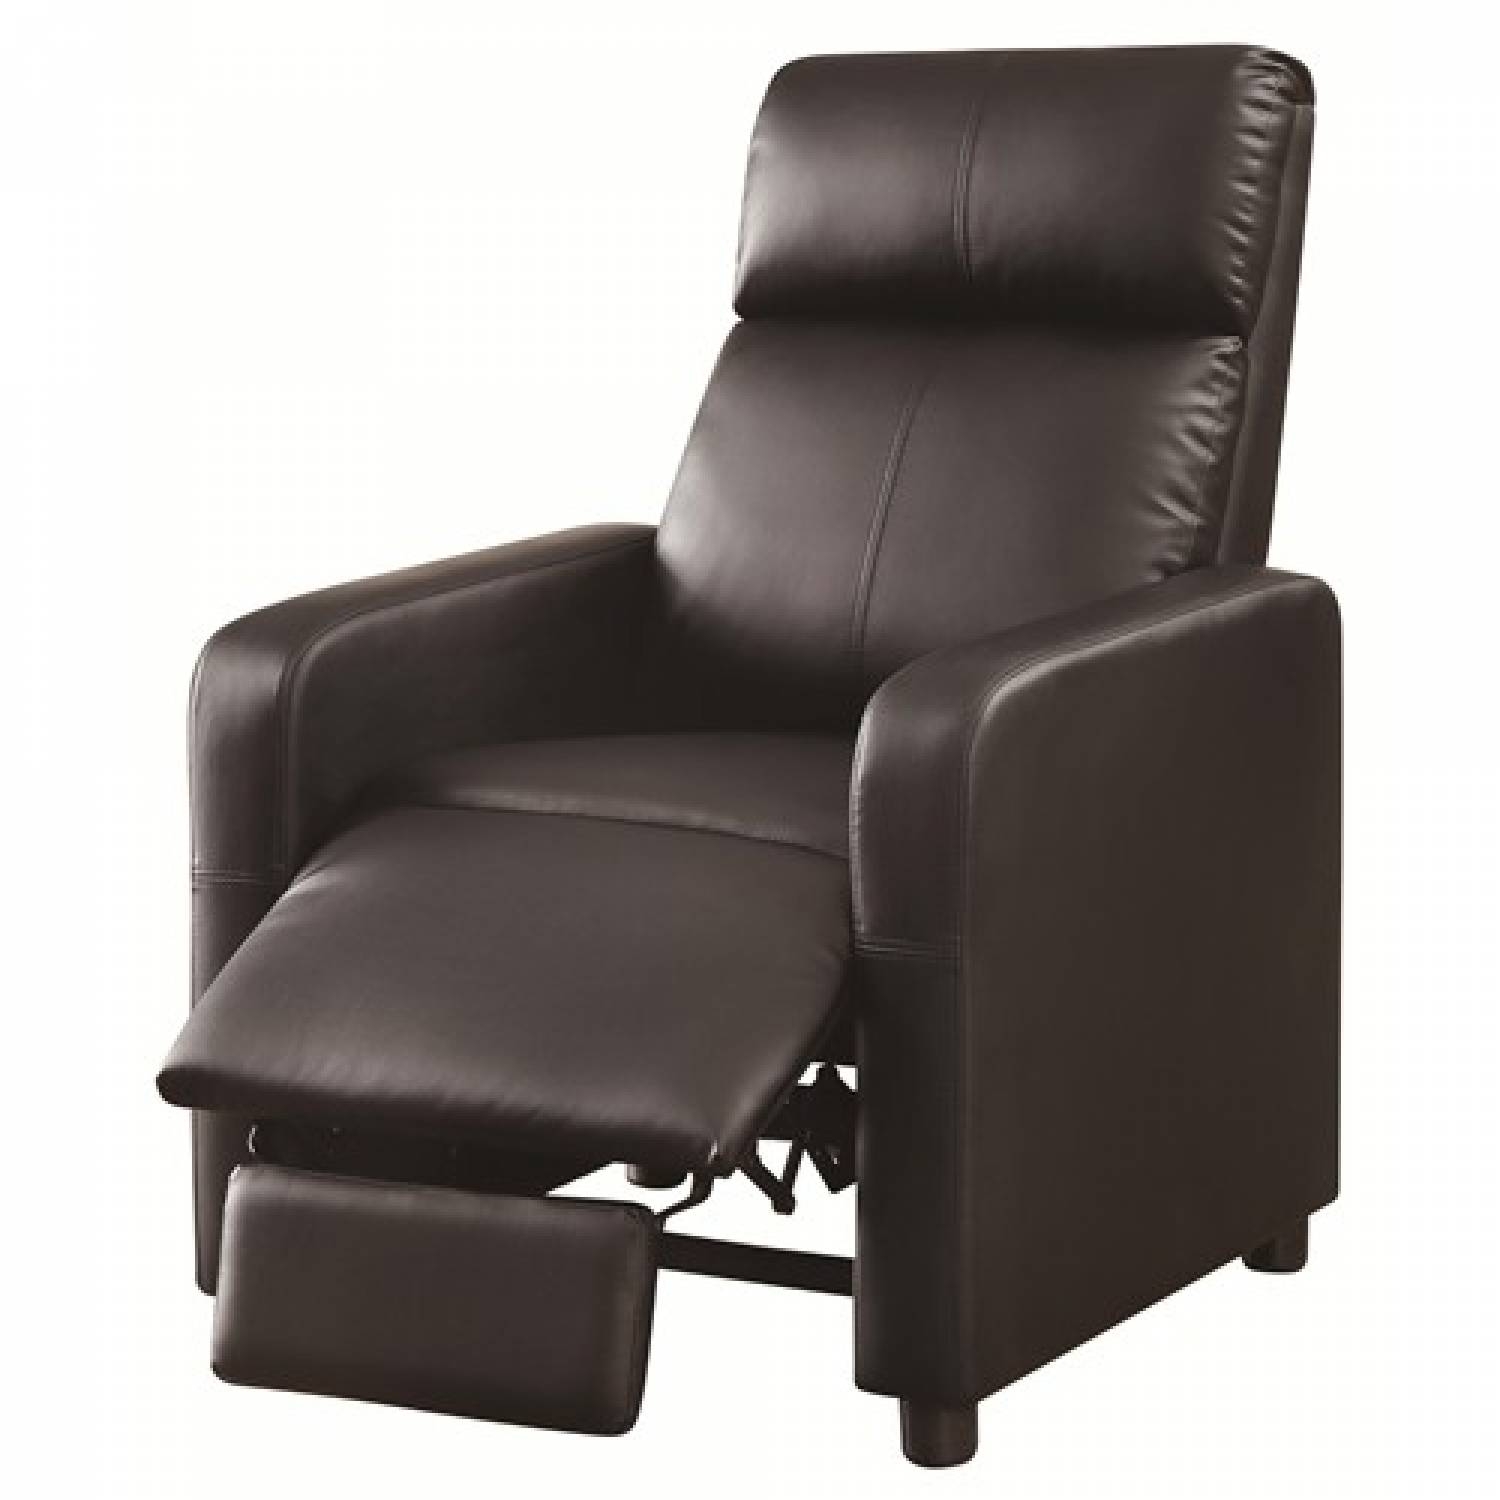 Push back chair and ottoman